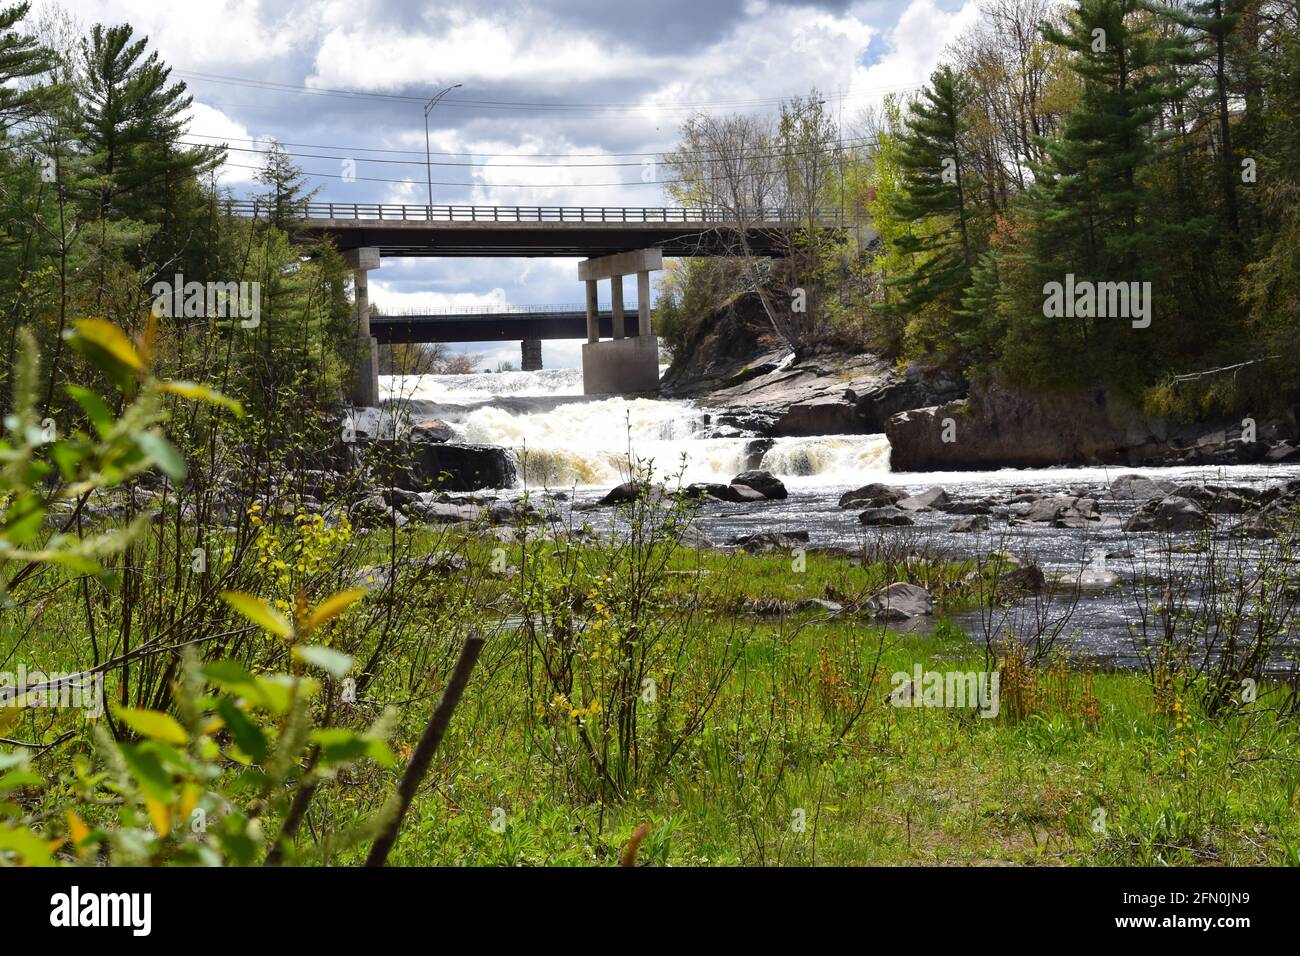 Scenic Maddington waterfalls in southern Quebec. This stream ends in the St-Lawrence waterway. However modest it’s cuteness is worth a caption. Stock Photo